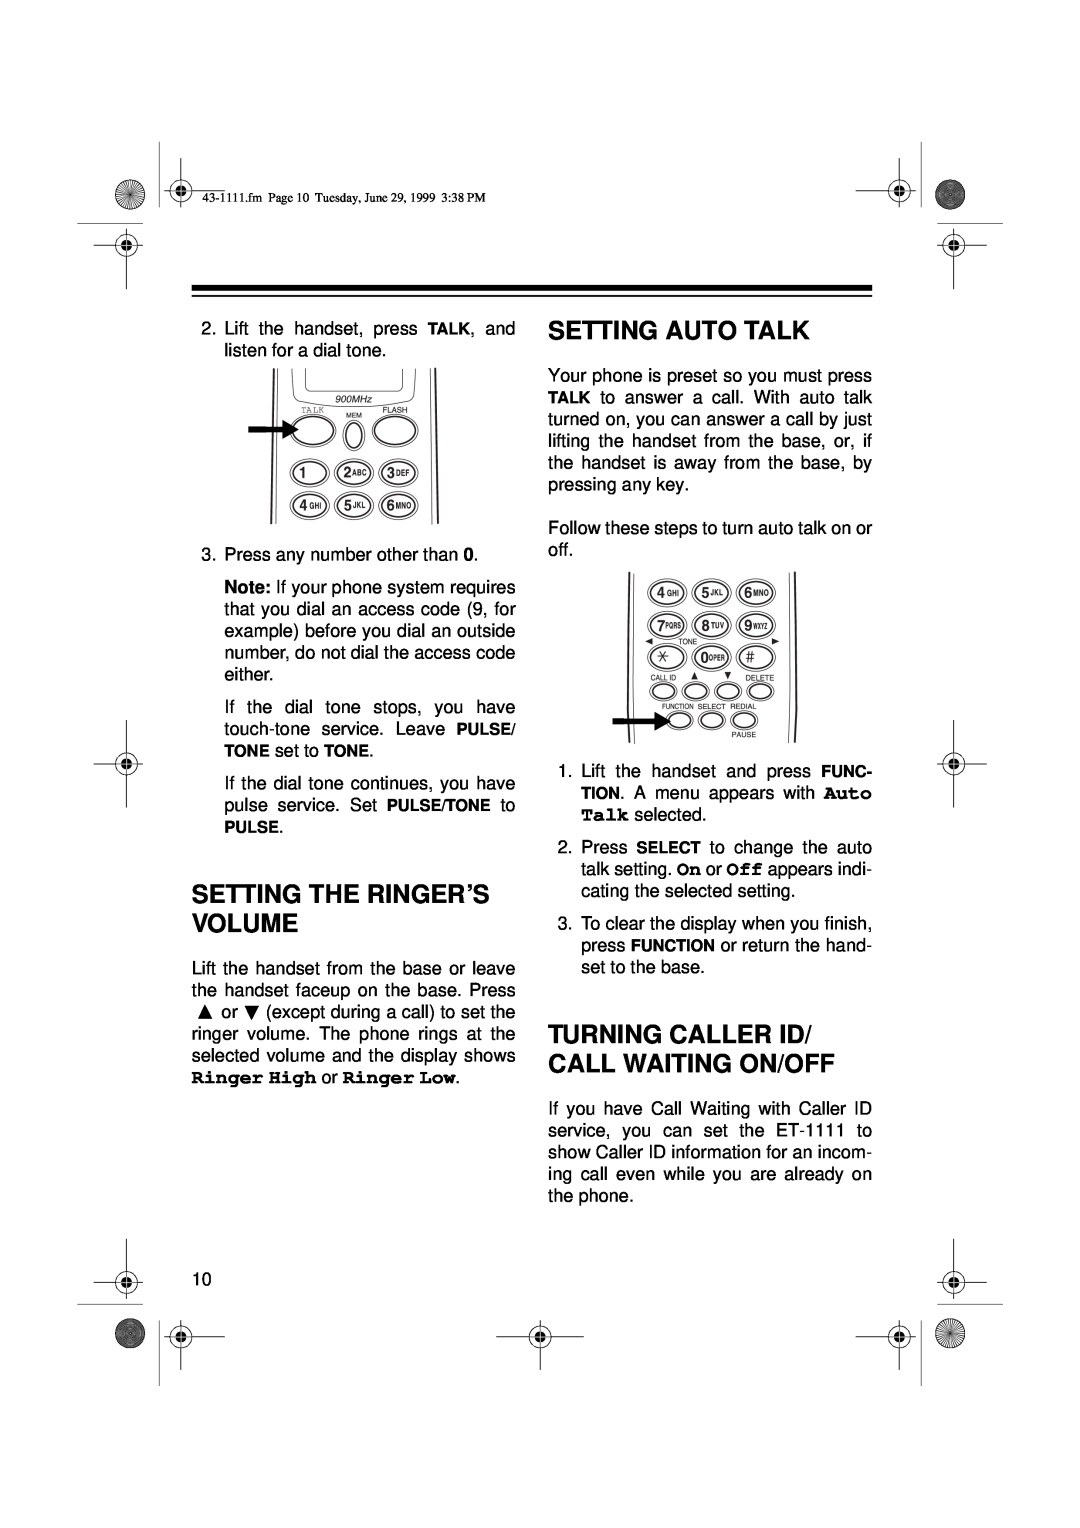 Radio Shack ET-1111 owner manual Setting The Ringer’S Volume, Setting Auto Talk, Turning Caller Id/ Call Waiting On/Off 